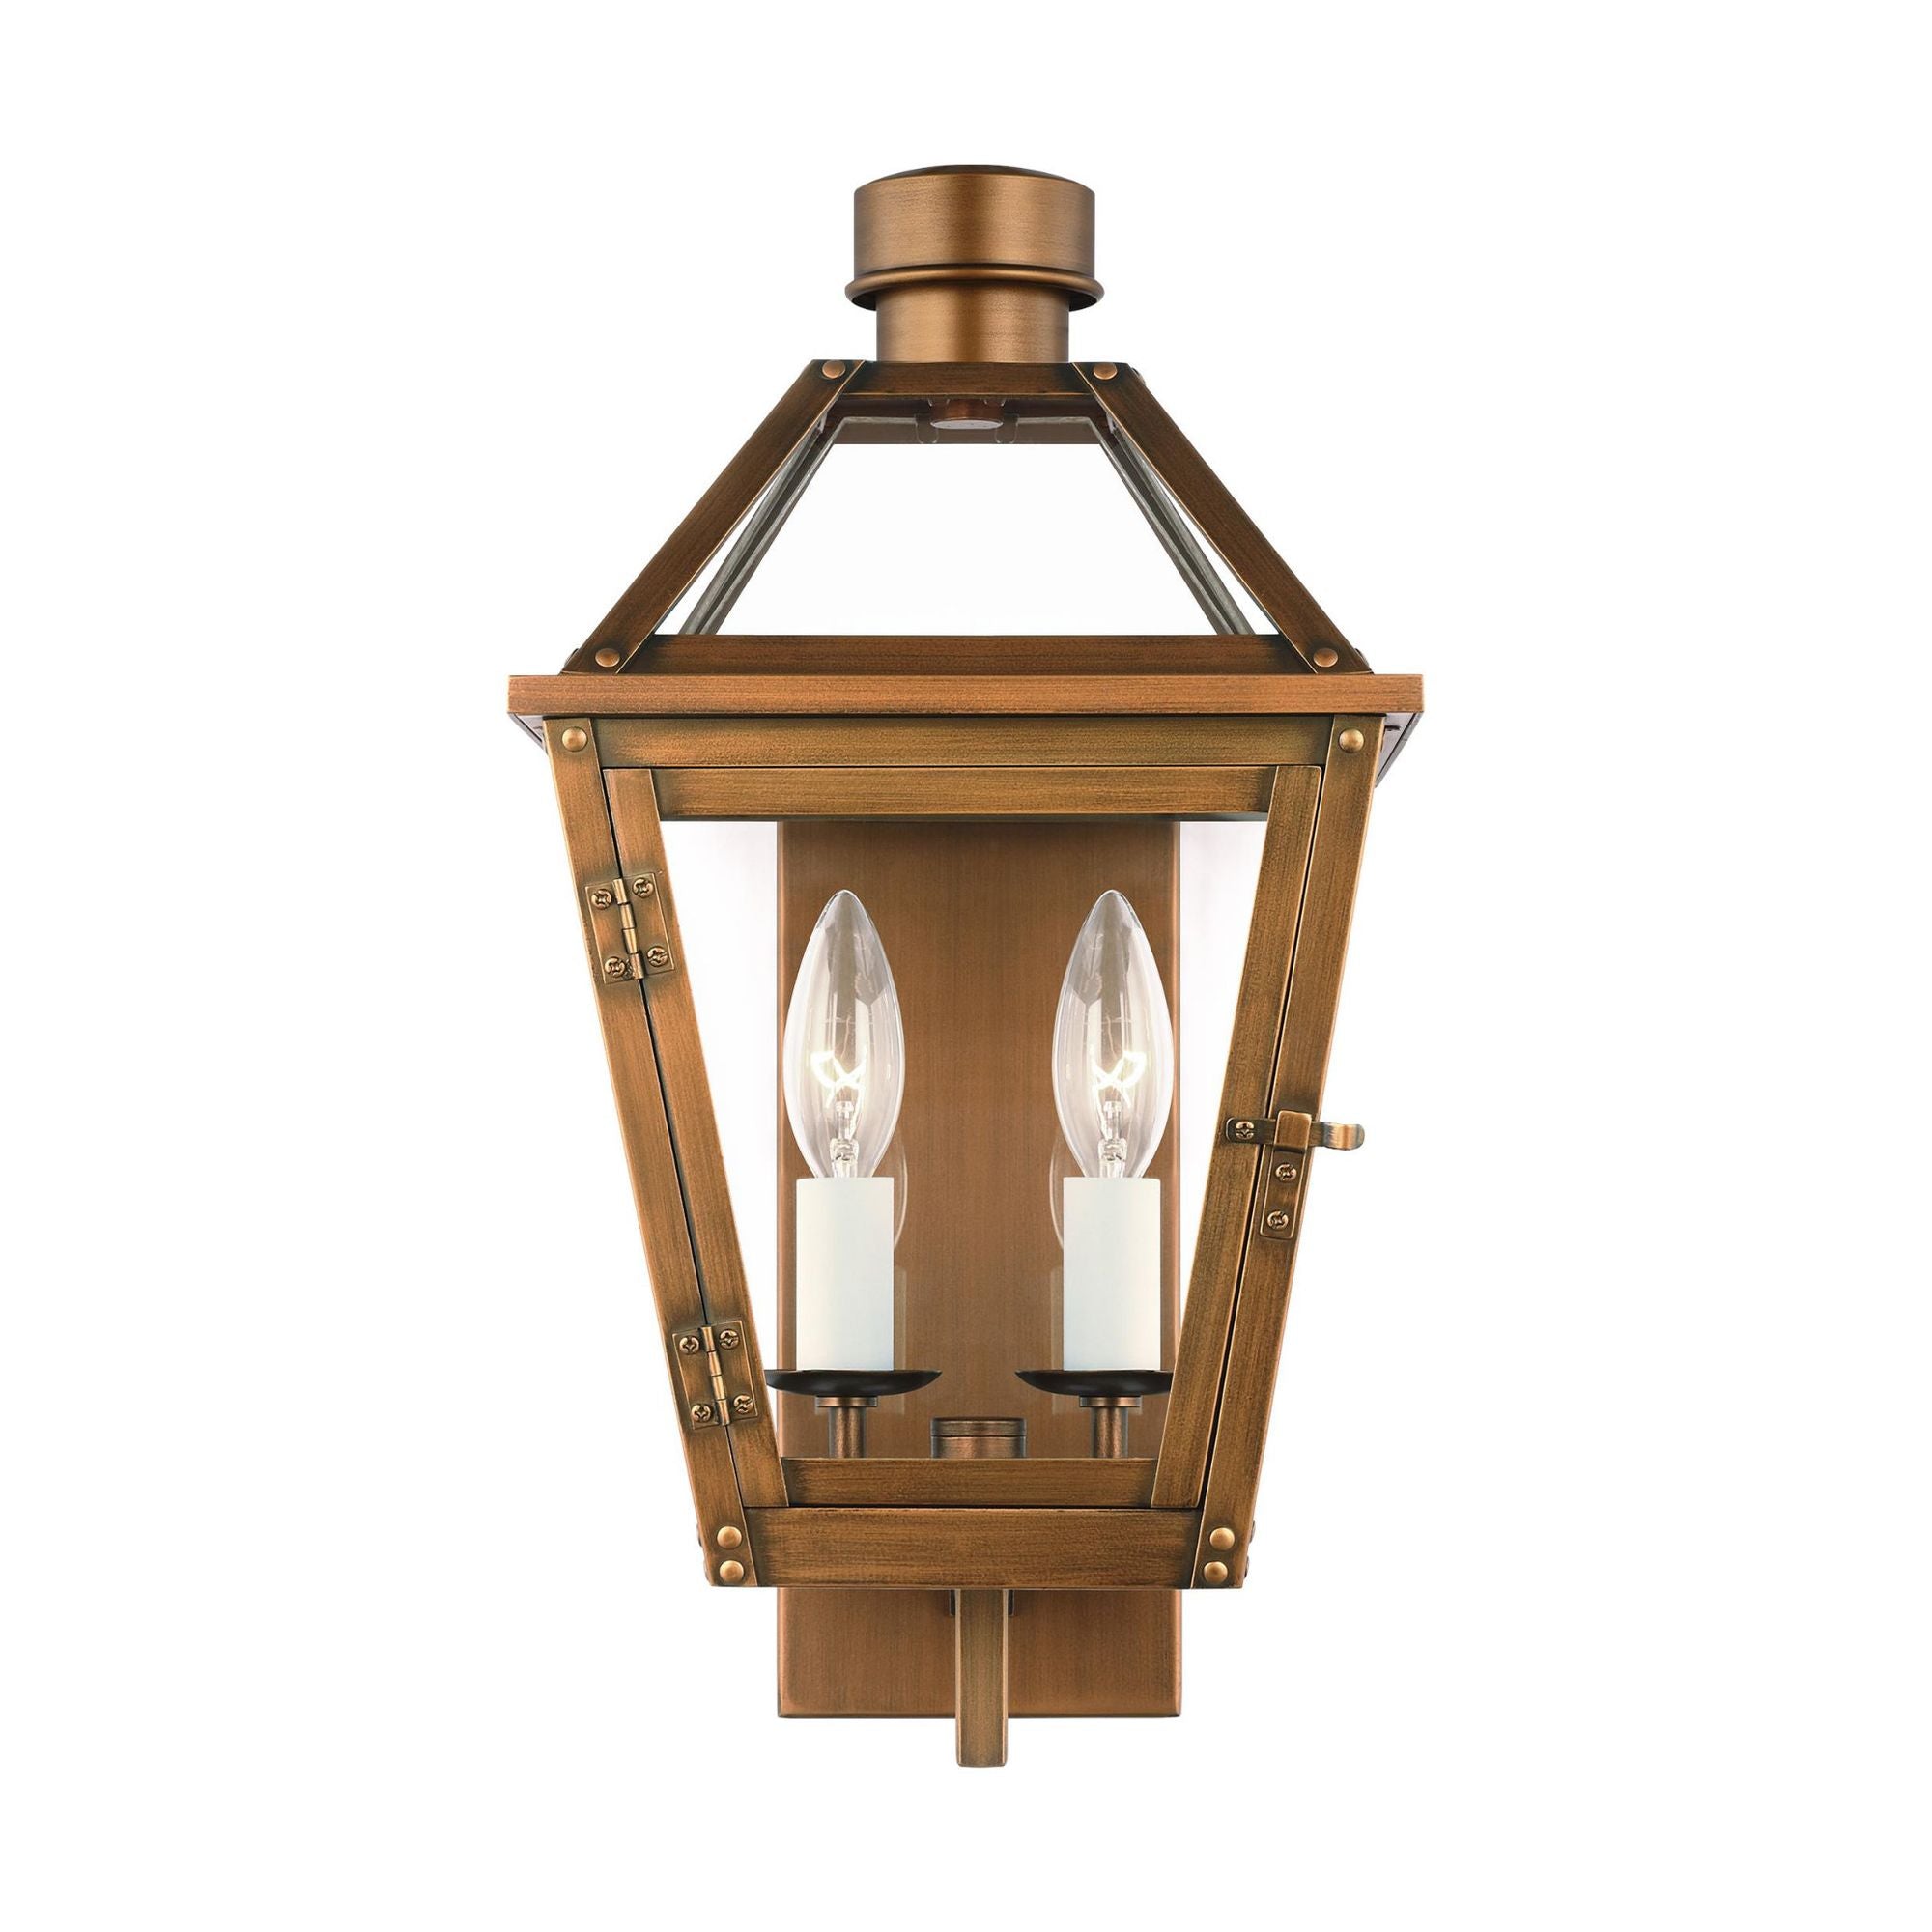 Chapman & Myers Hyannis Small Wall Lantern in Natural Copper